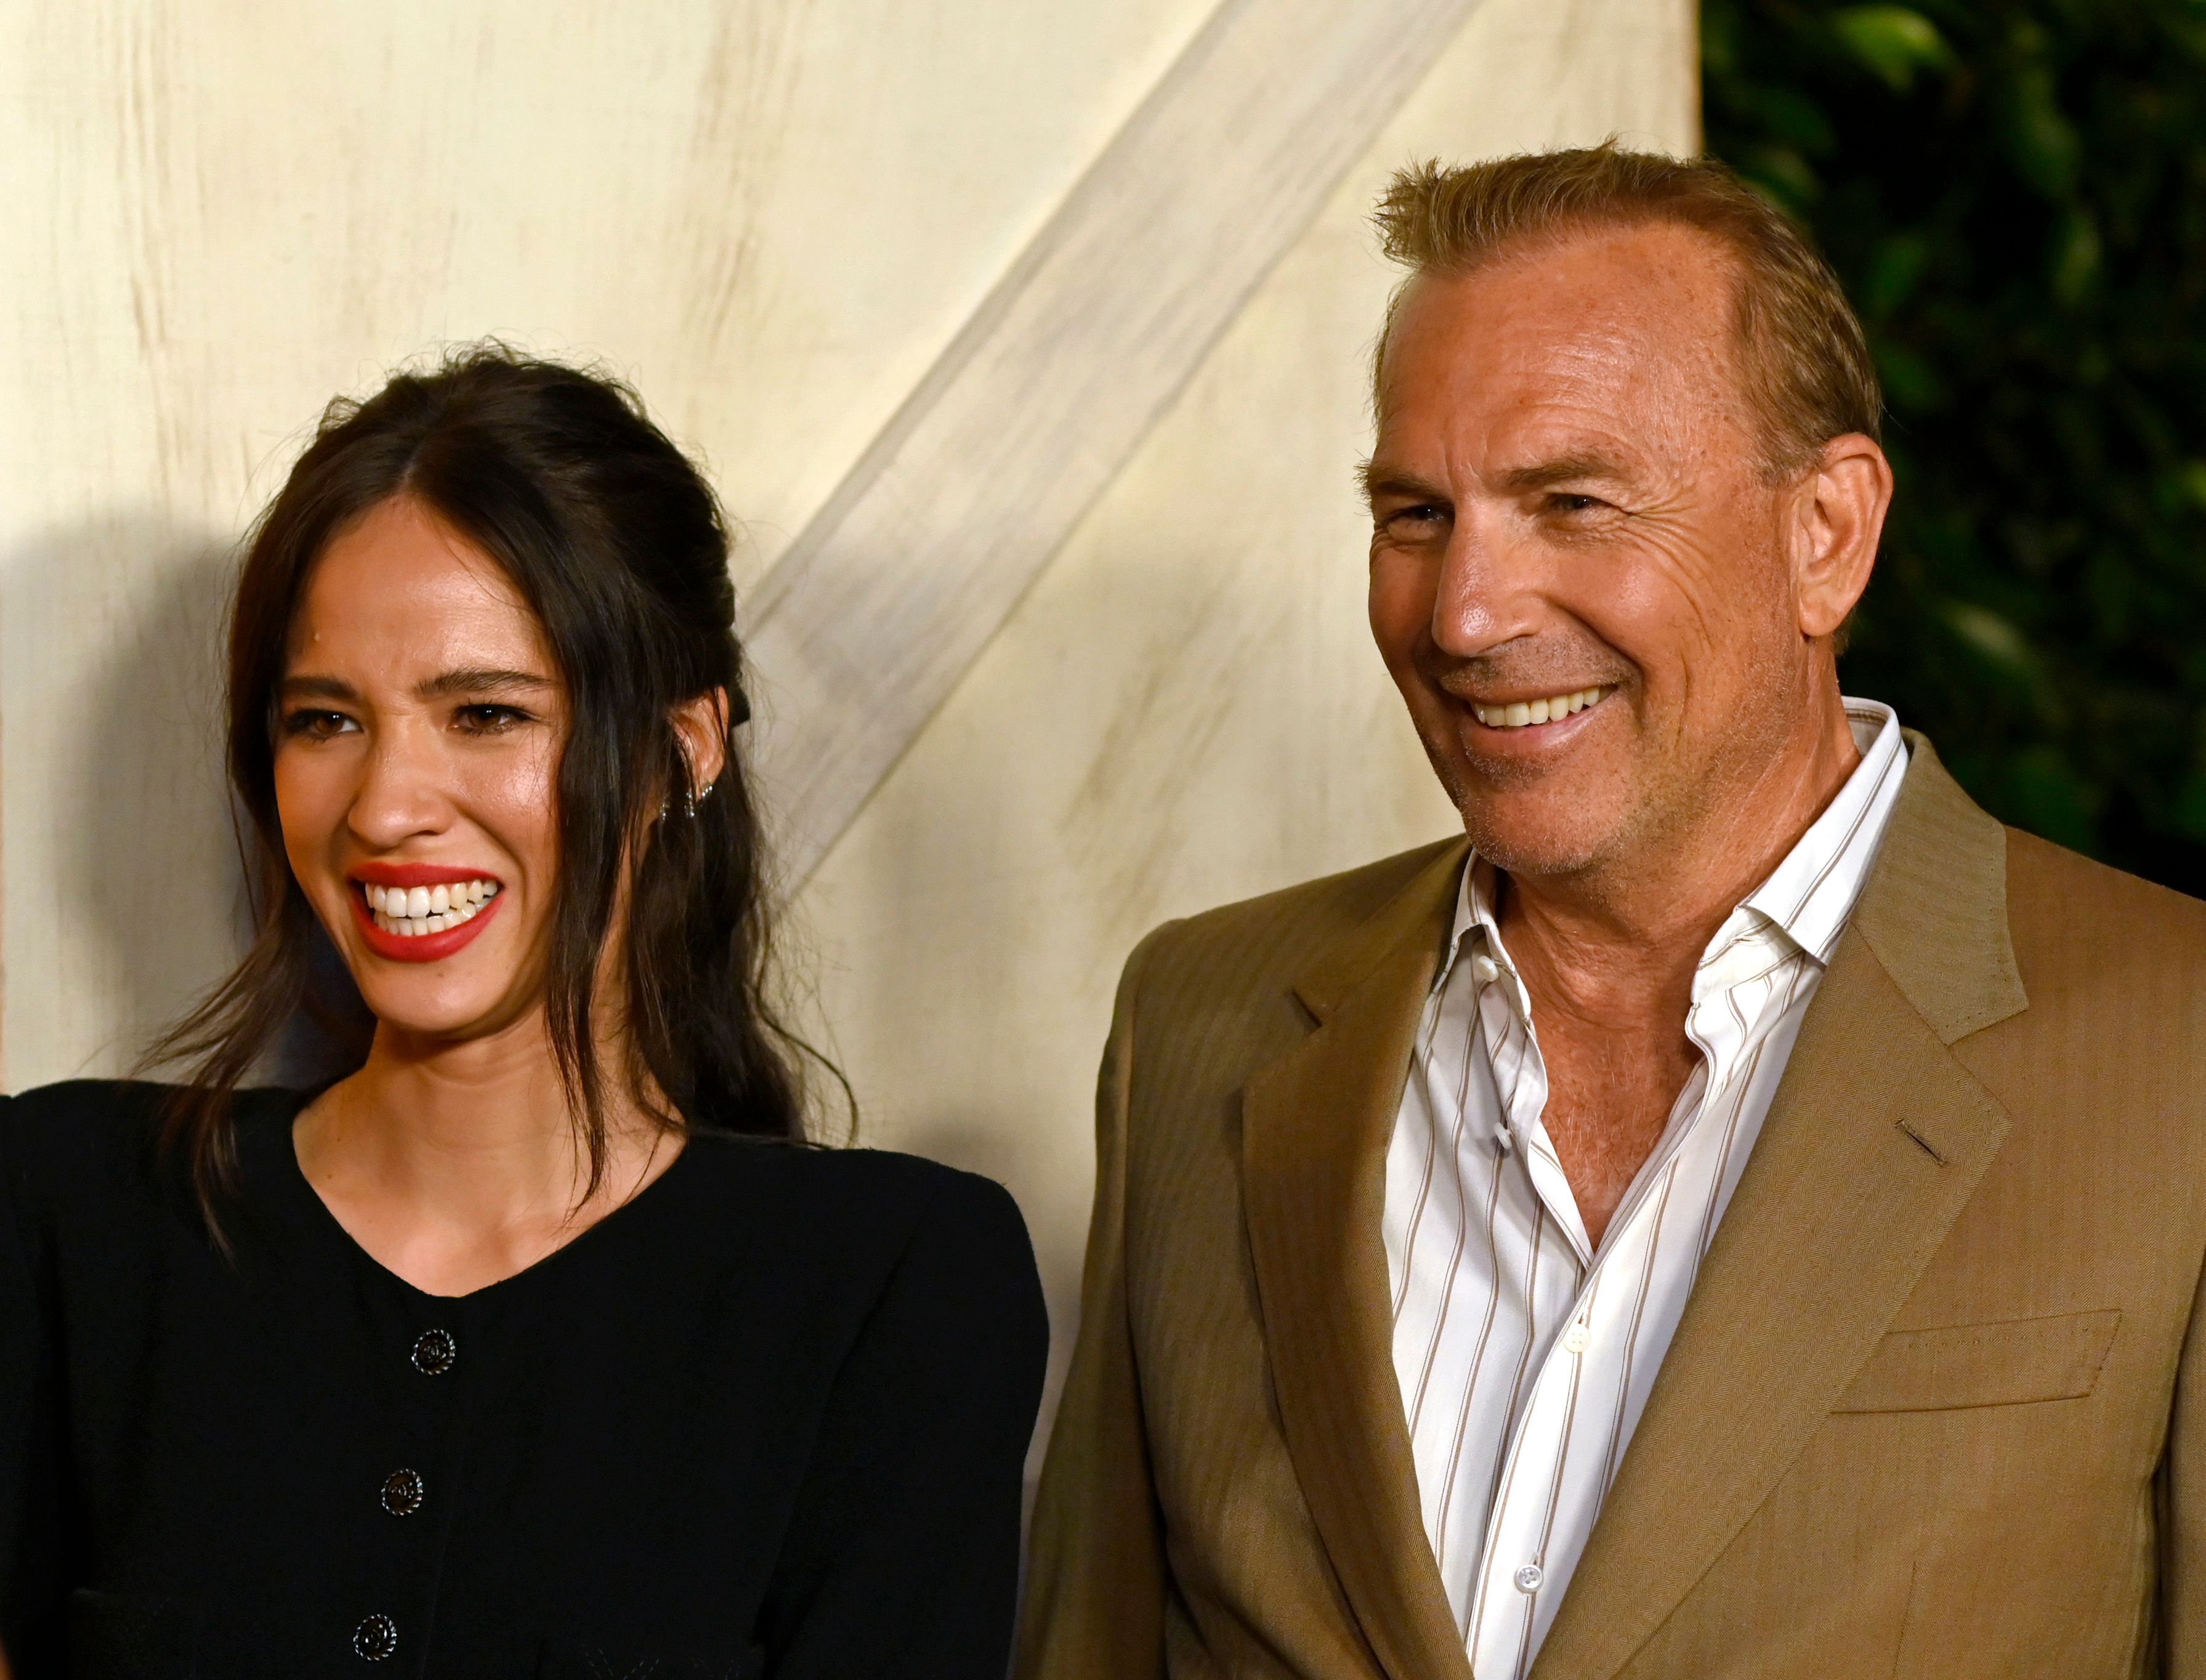 Kelsey Asbille and Kevin Costner at Paramount Network's "Yellowstone" season 2 premiere party on May 30, 2019 | Photo: Getty Images